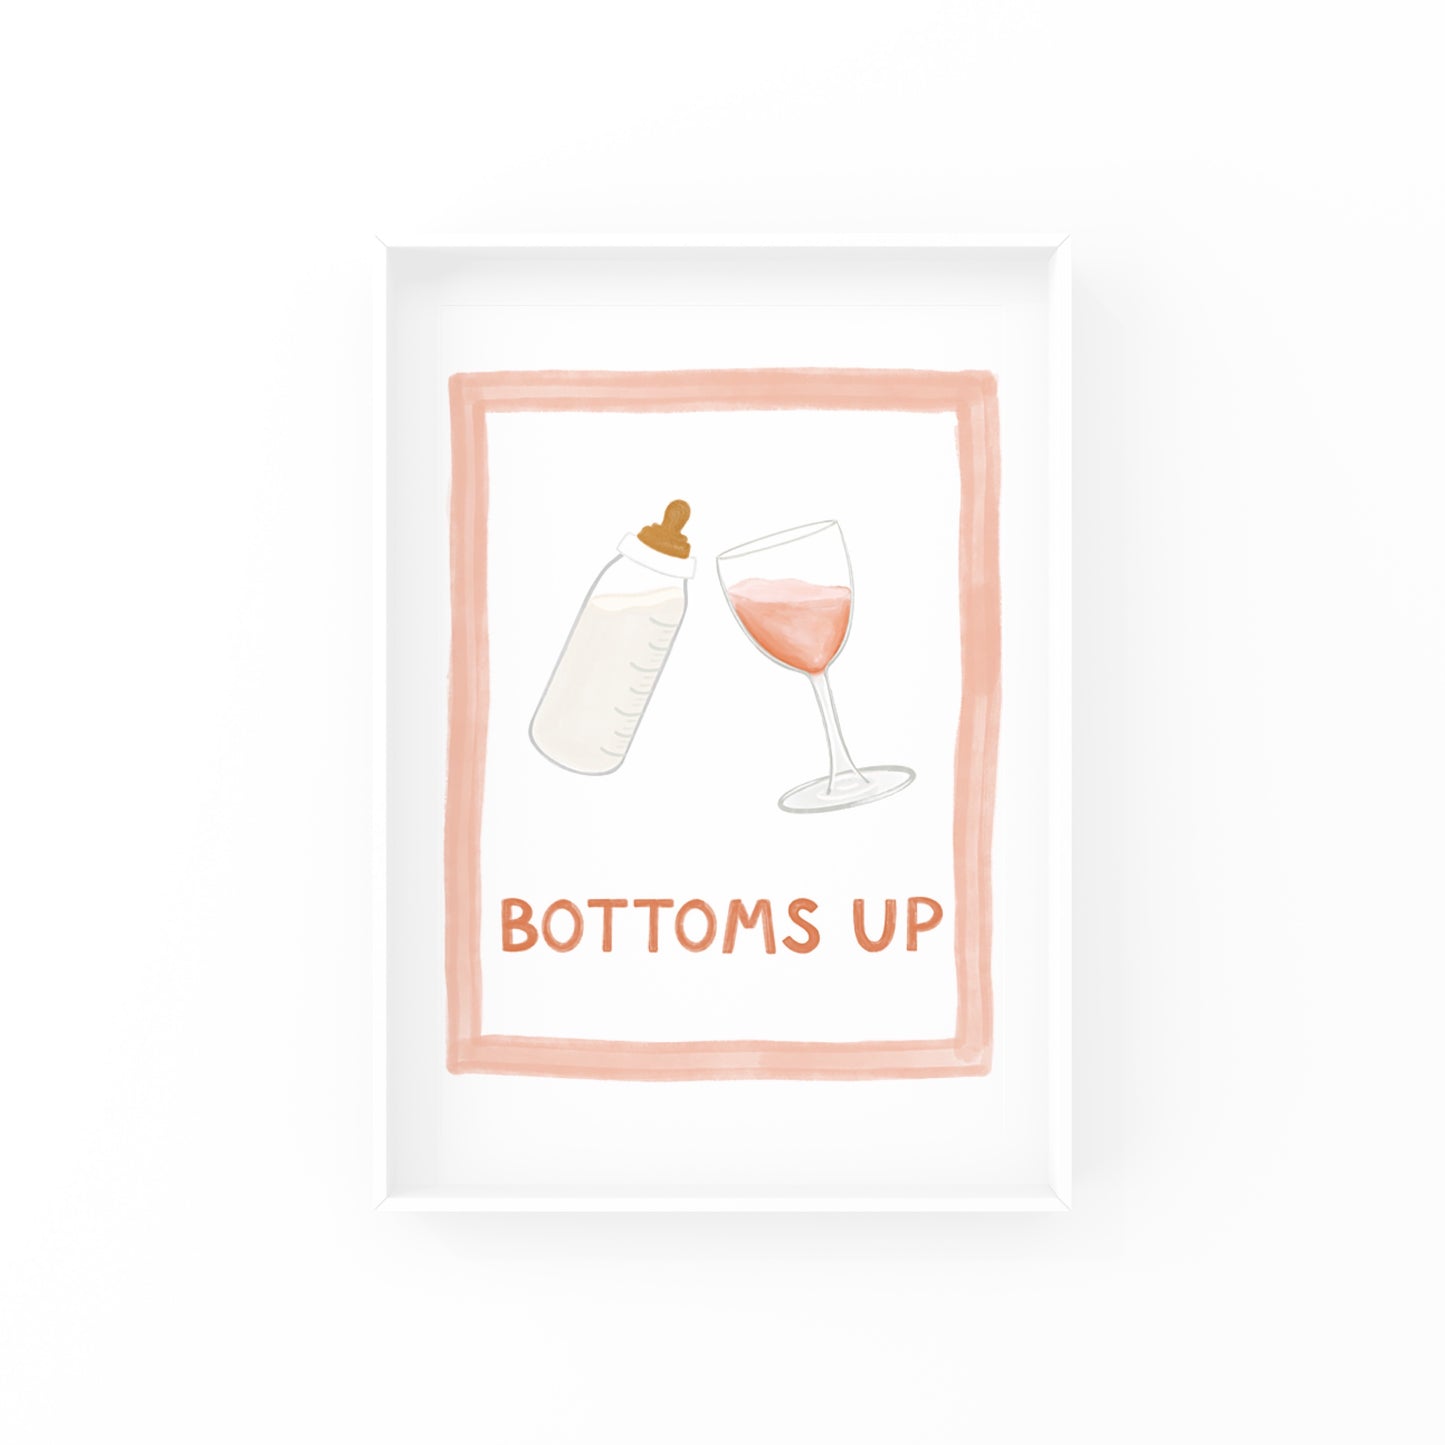 This art print says "Bottoms up" with a hand-illustrated glass of rose cheersing a bottle of milk. It's cute and funny, and perfect for any nursery or baby shower decor! Makes an especially great gift for any wine or rose lover out there!